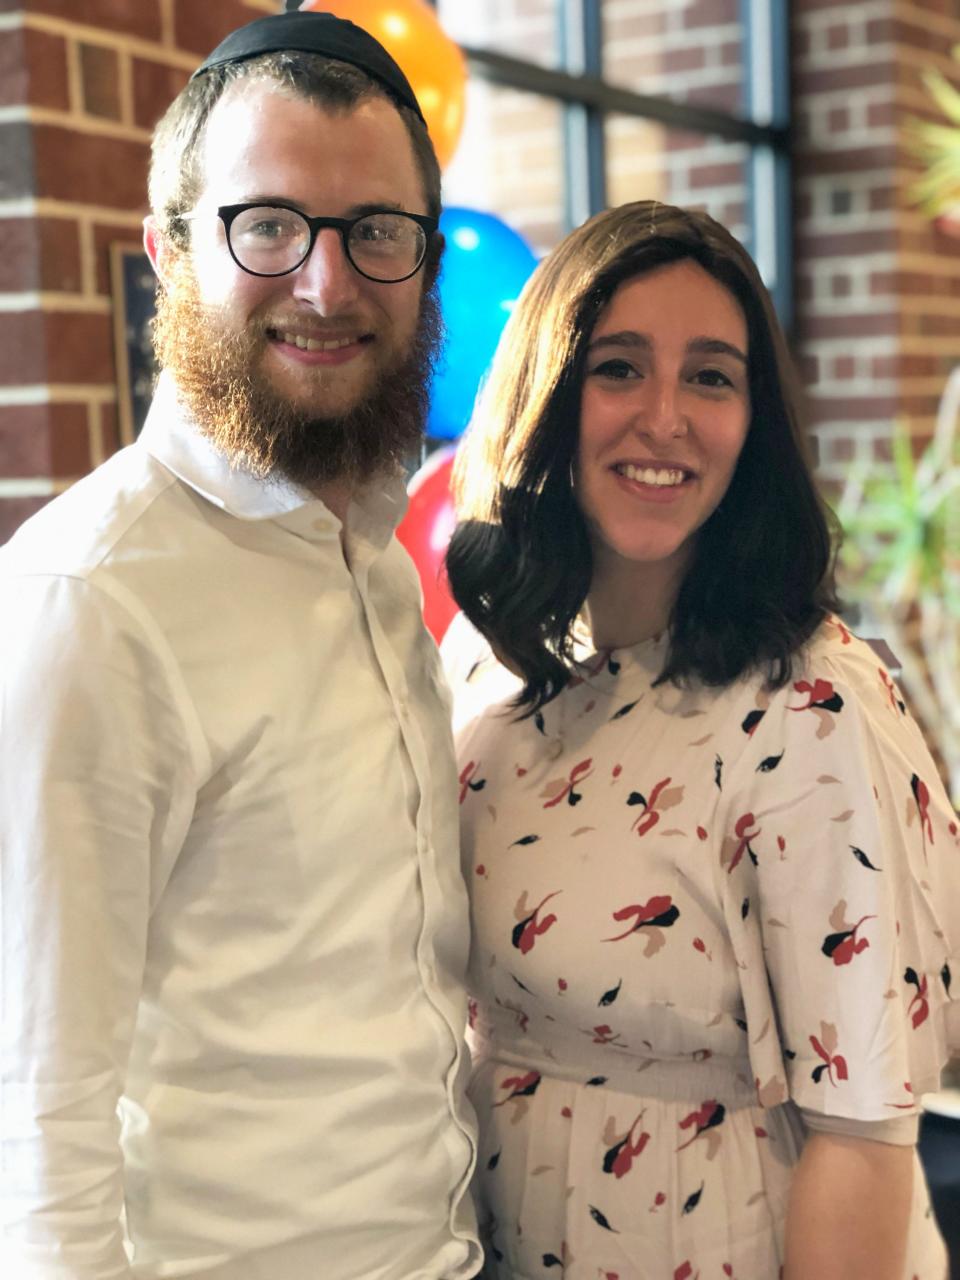 Rabbi Moshe Luchins and his wife Sheina have made it their mission to involve and educate the Milwaukee-area community about Jewish values. They will open the Jewish Discovery Center June 23, 2022 and have a grand opening later in August.